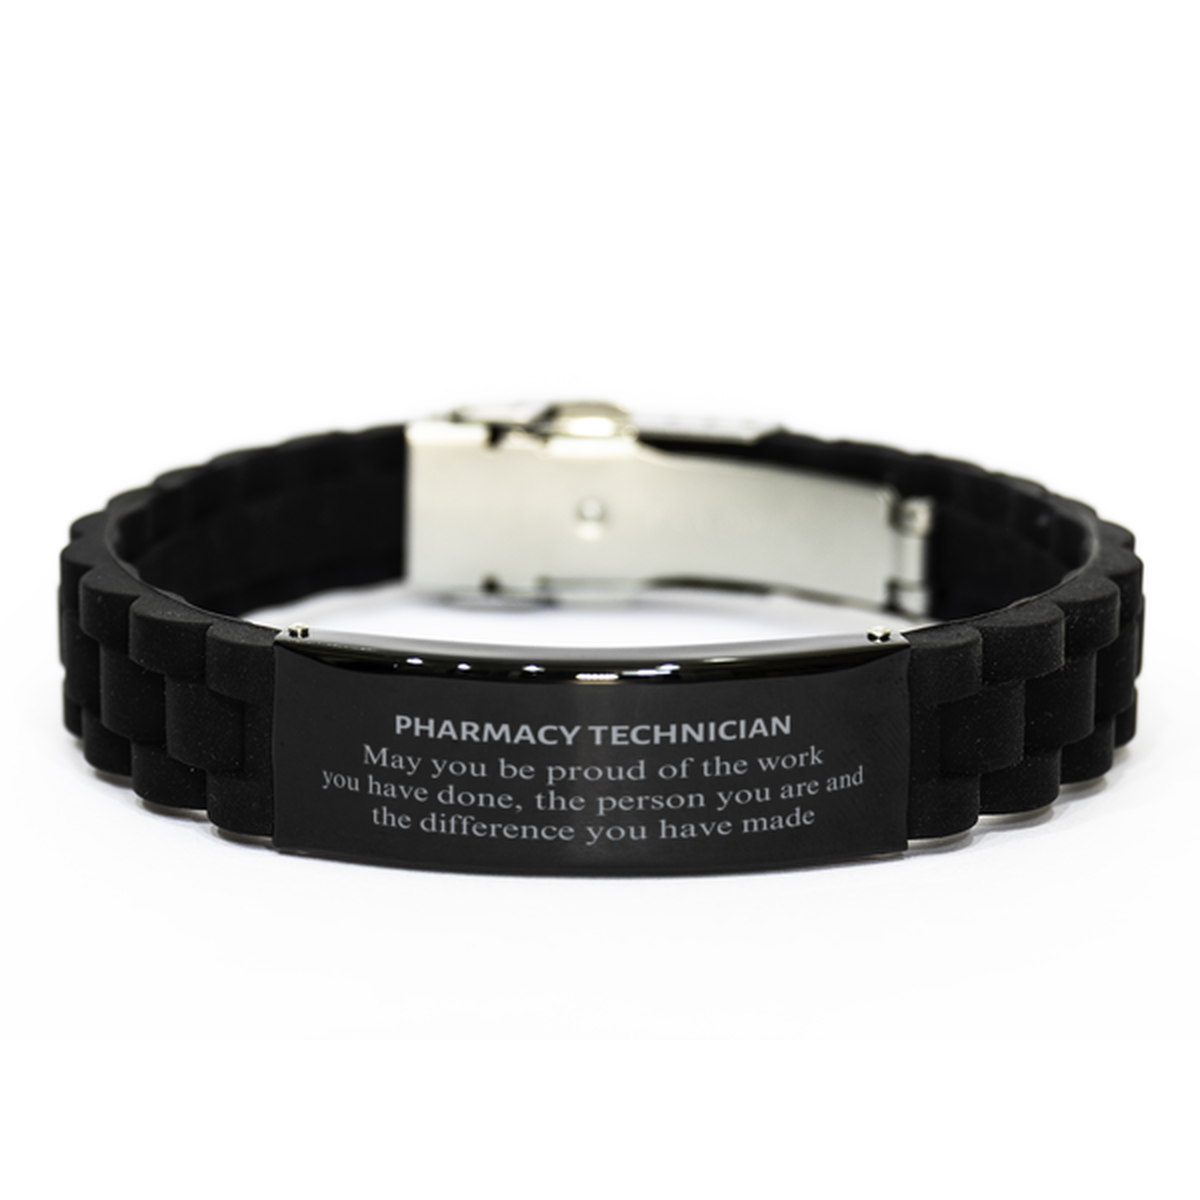 Pharmacy Technician May you be proud of the work you have done, Retirement Pharmacy Technician Black Glidelock Clasp Bracelet for Colleague Appreciation Gifts Amazing for Pharmacy Technician